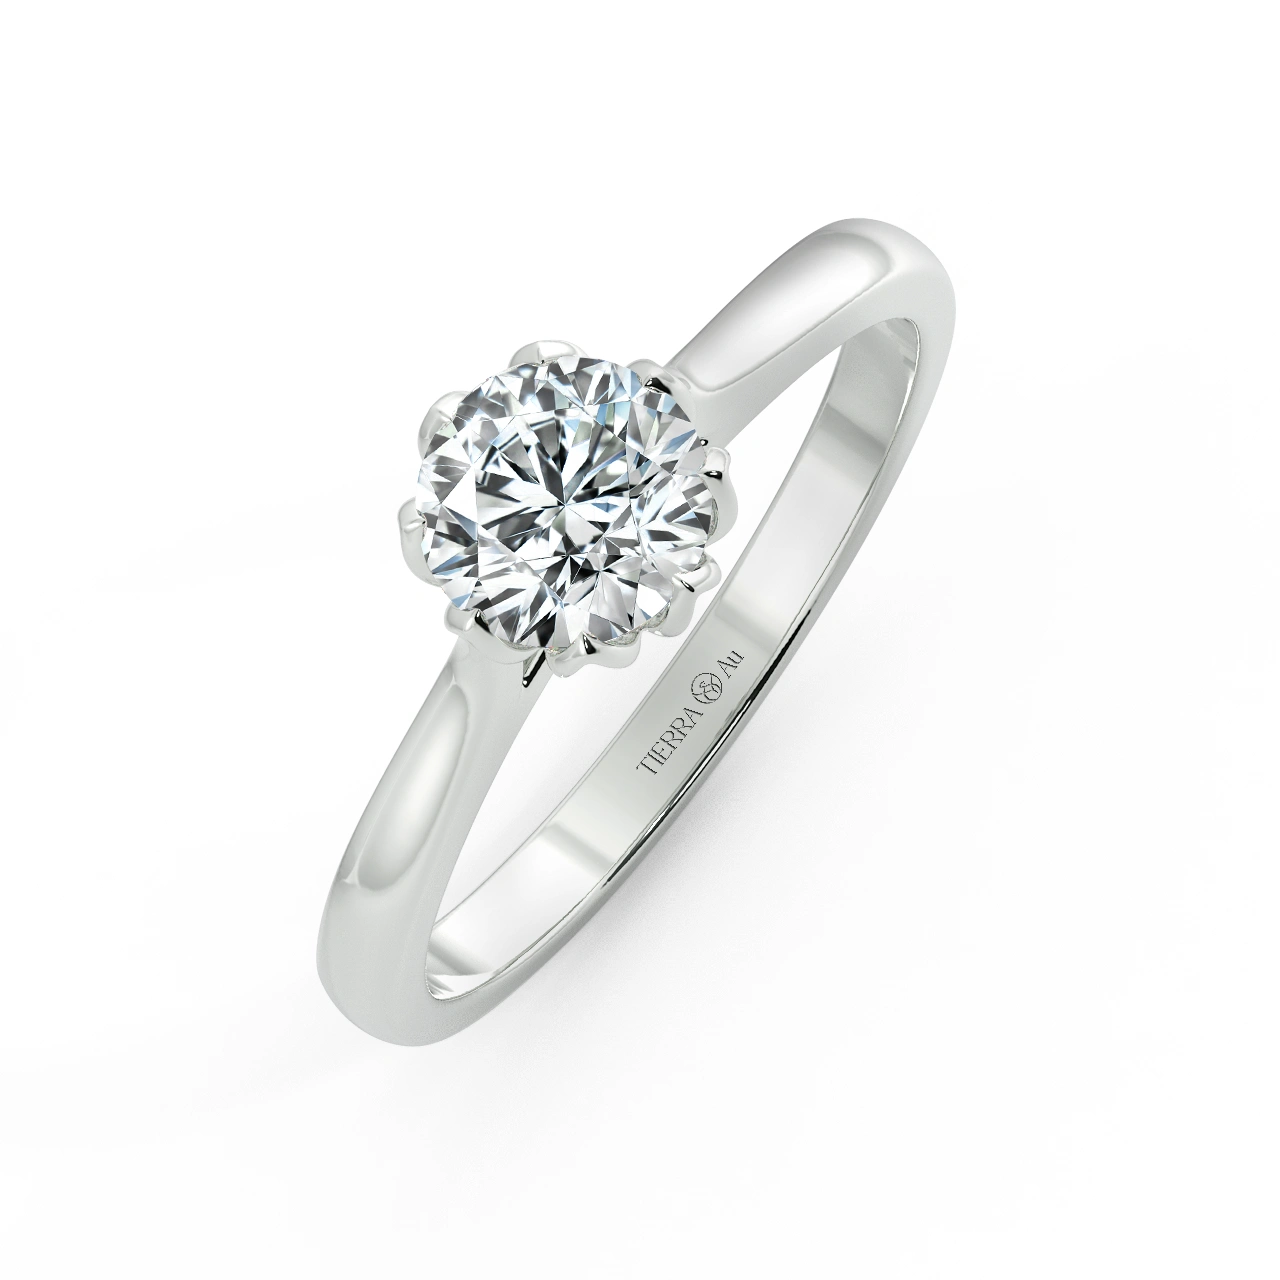 Shiny Floral Cathedral Engagement Ring NCH1513 3